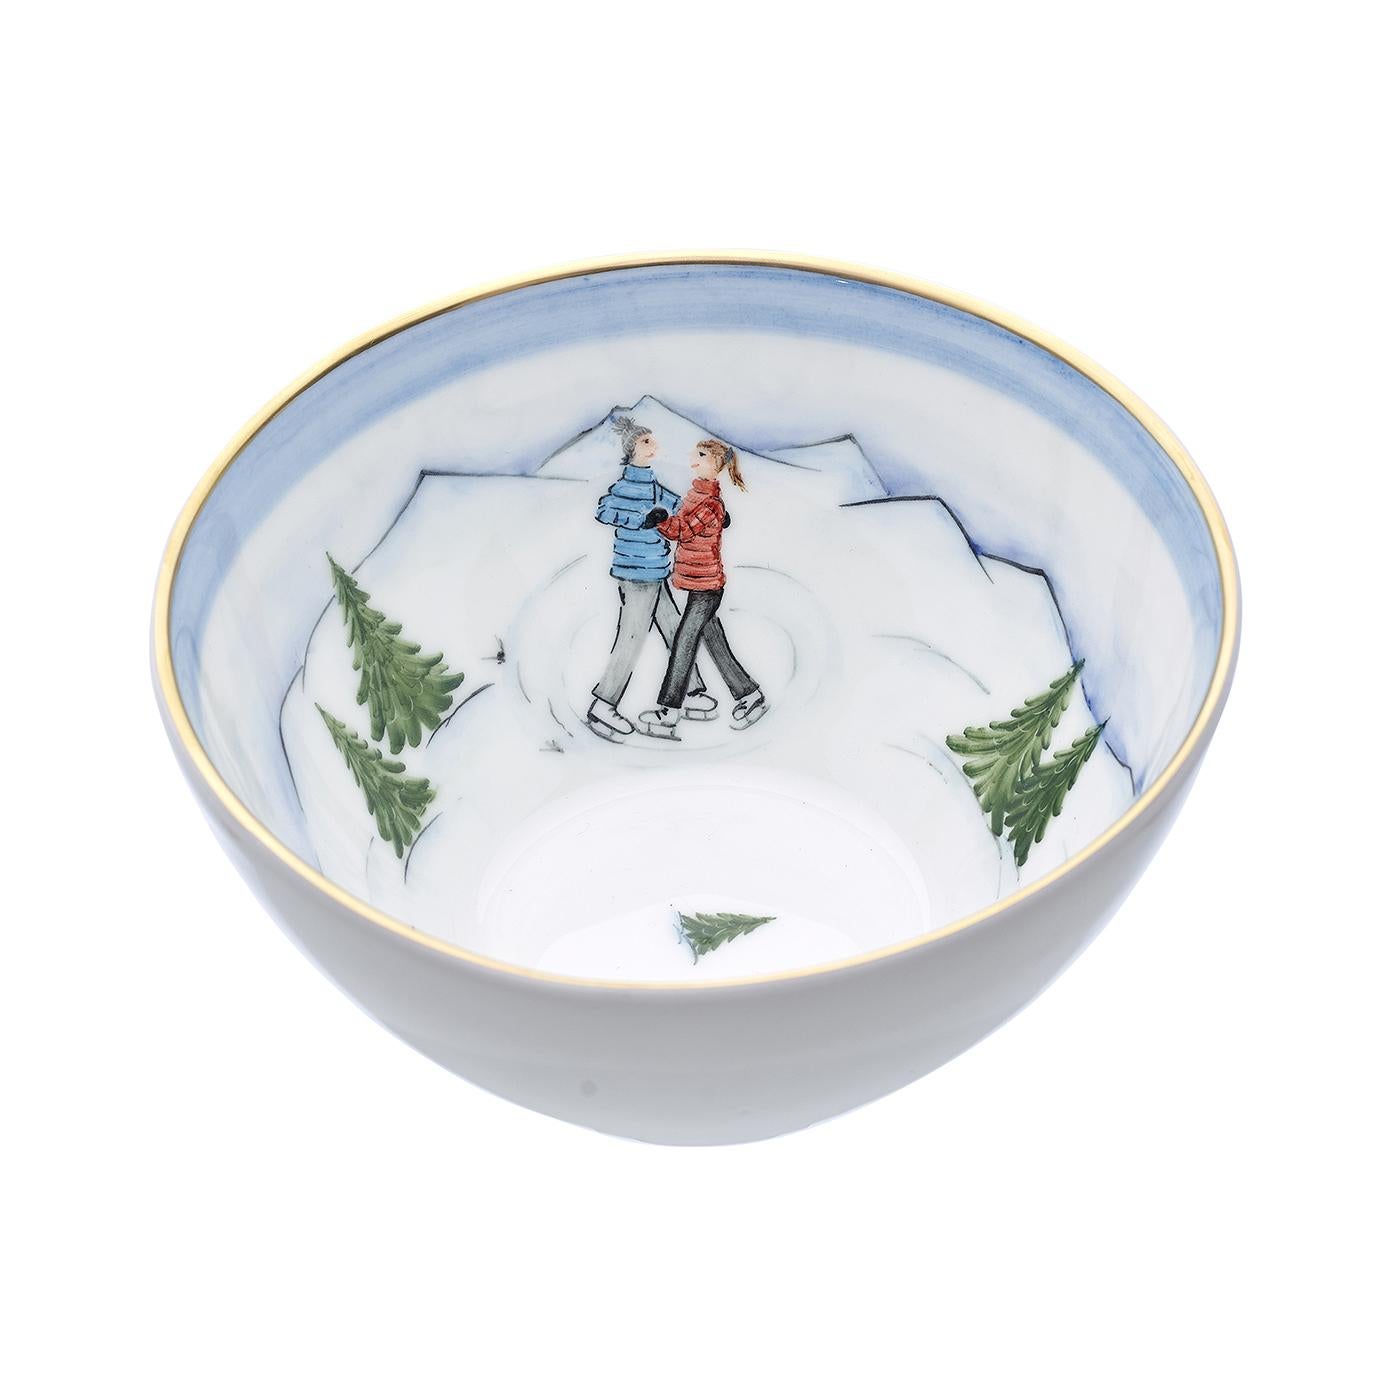 These completely handmade porcelain bowls are painted by hand with a charming hands-free winter decor. Teh decor comes as a set of three decors. One shows a boy on a sladder, the second bowl is hands-free painted with a pair of ice skater.
The third